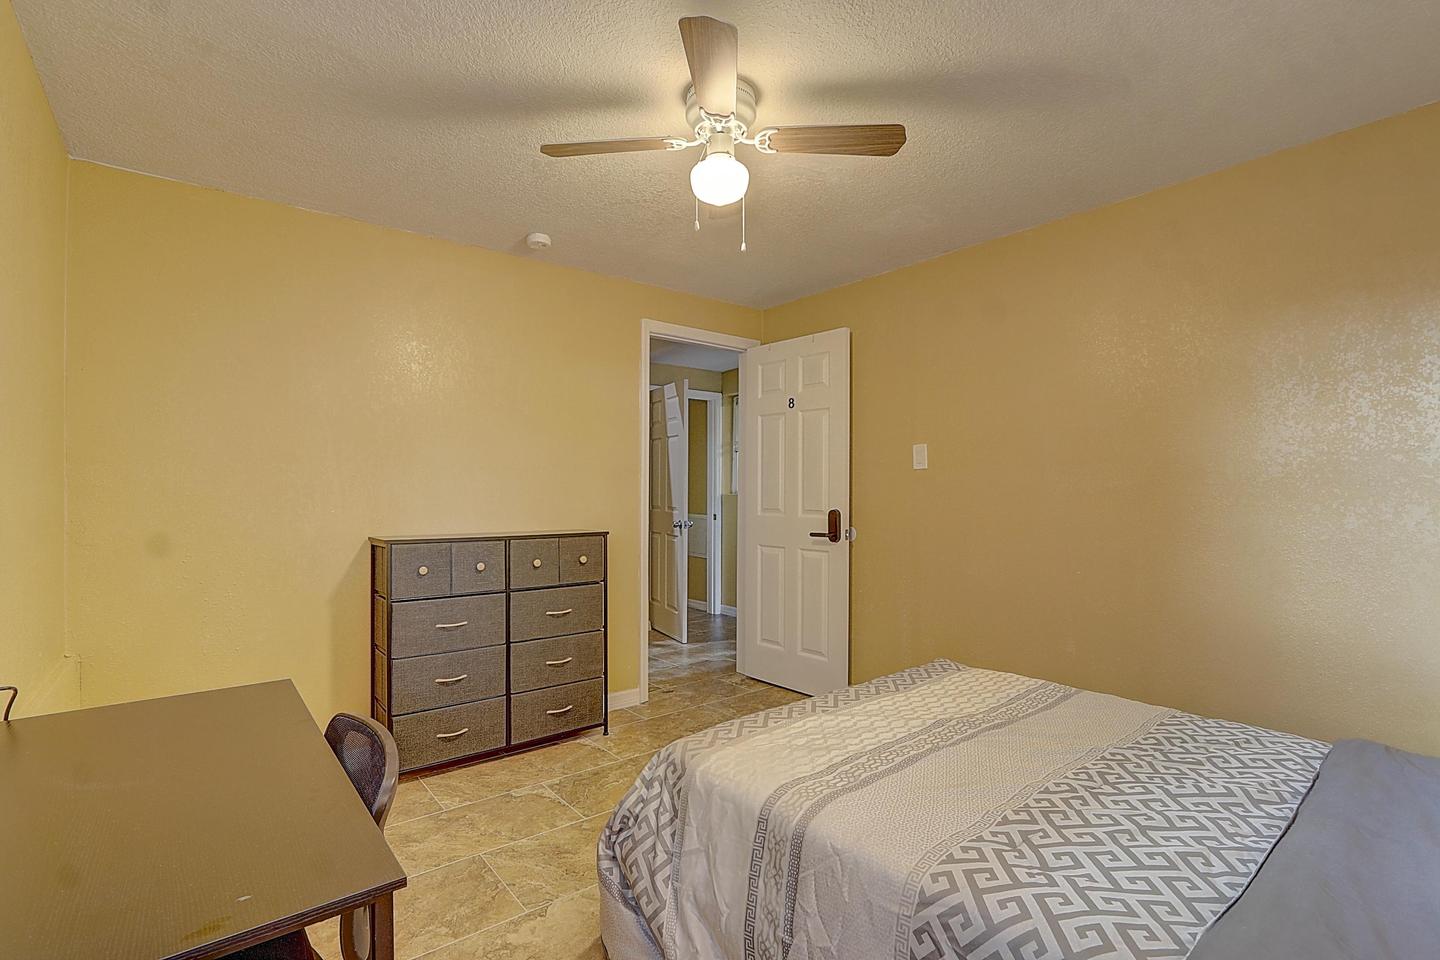 Large Room (8) - 132 sq ft, Private AC